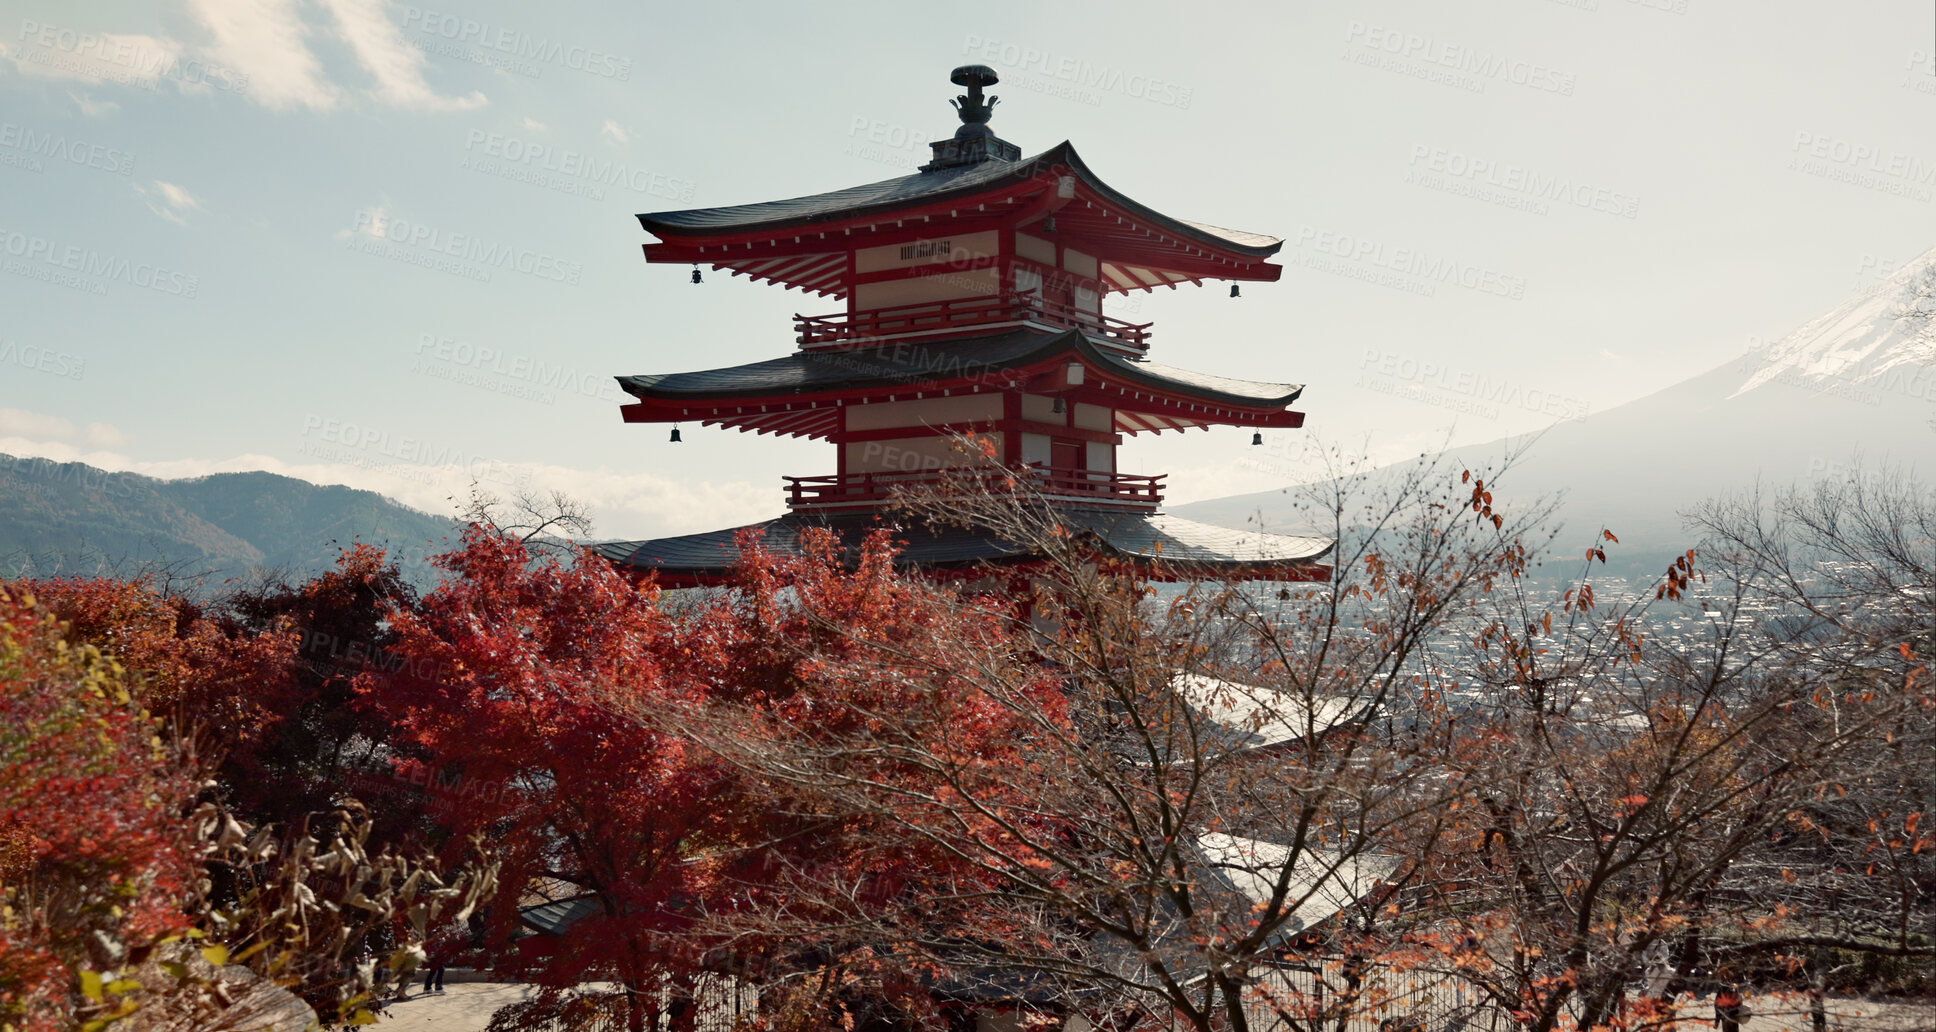 Buy stock photo Shinto temple, building and trees in nature for religion, faith and landscape with mountains by sky background. Traditional architecture, praise and worship in environment for culture, peace and calm